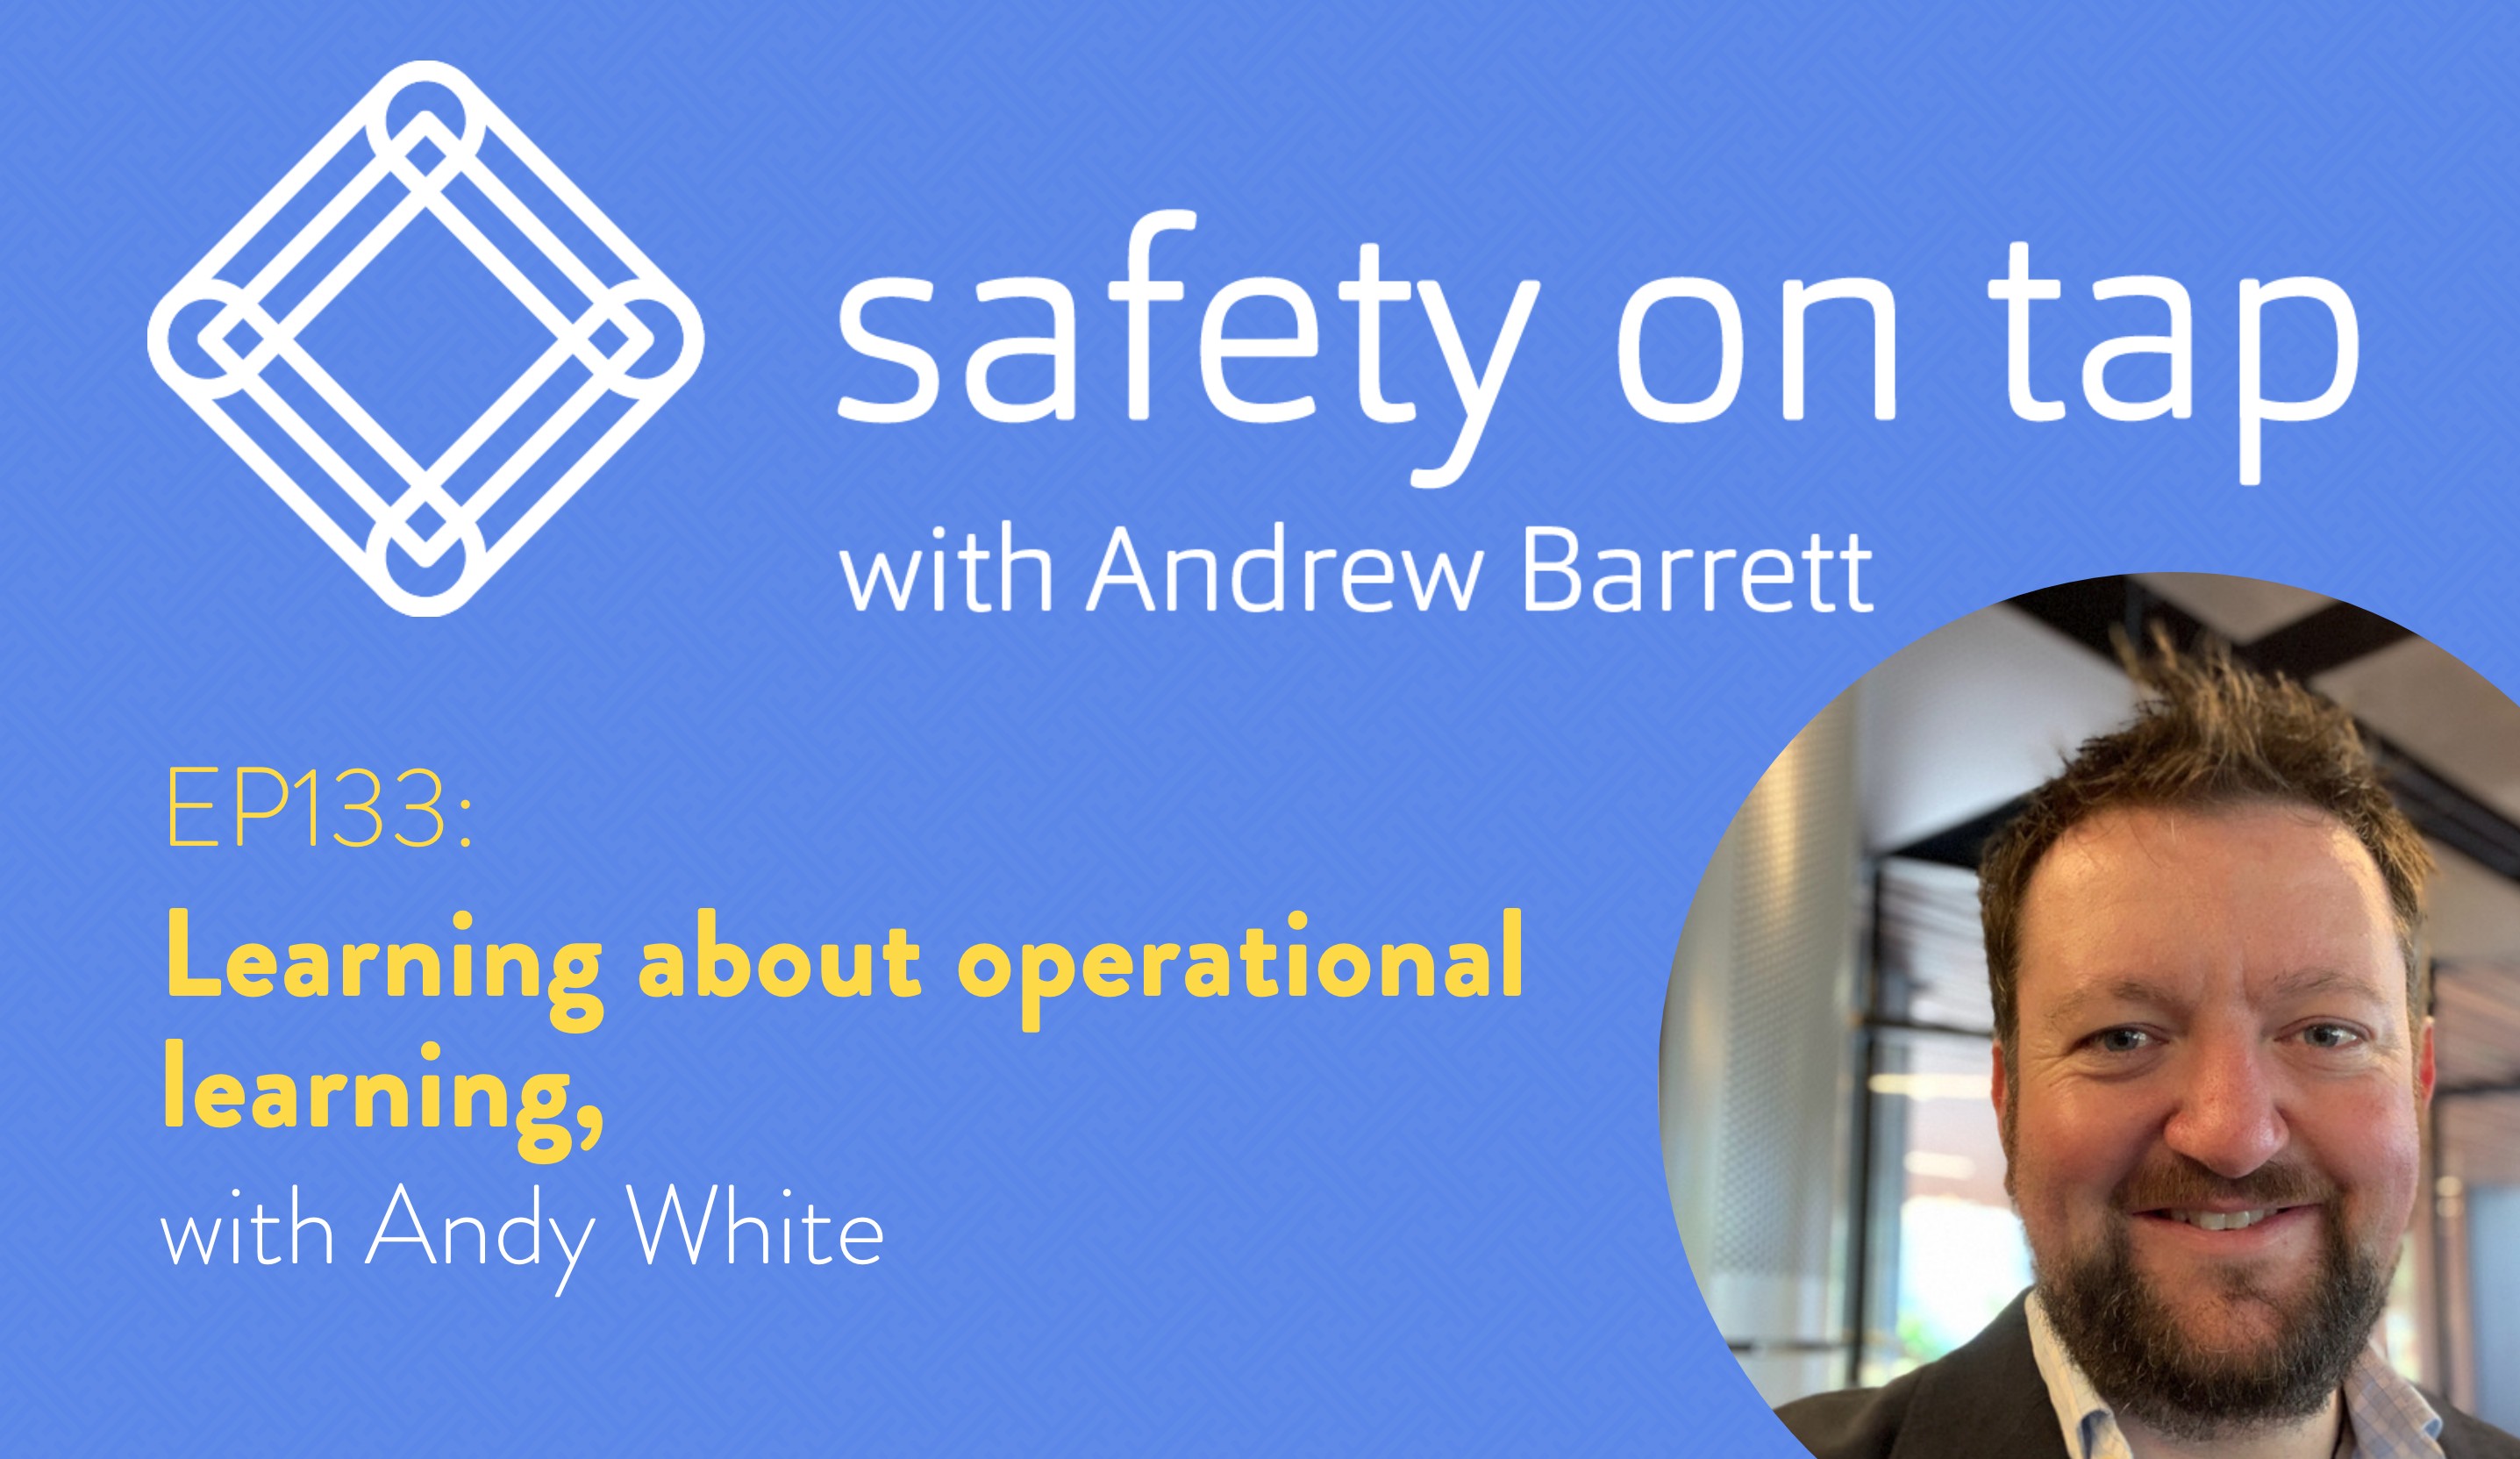 Ep133: Learning about operational learning, with Andy White